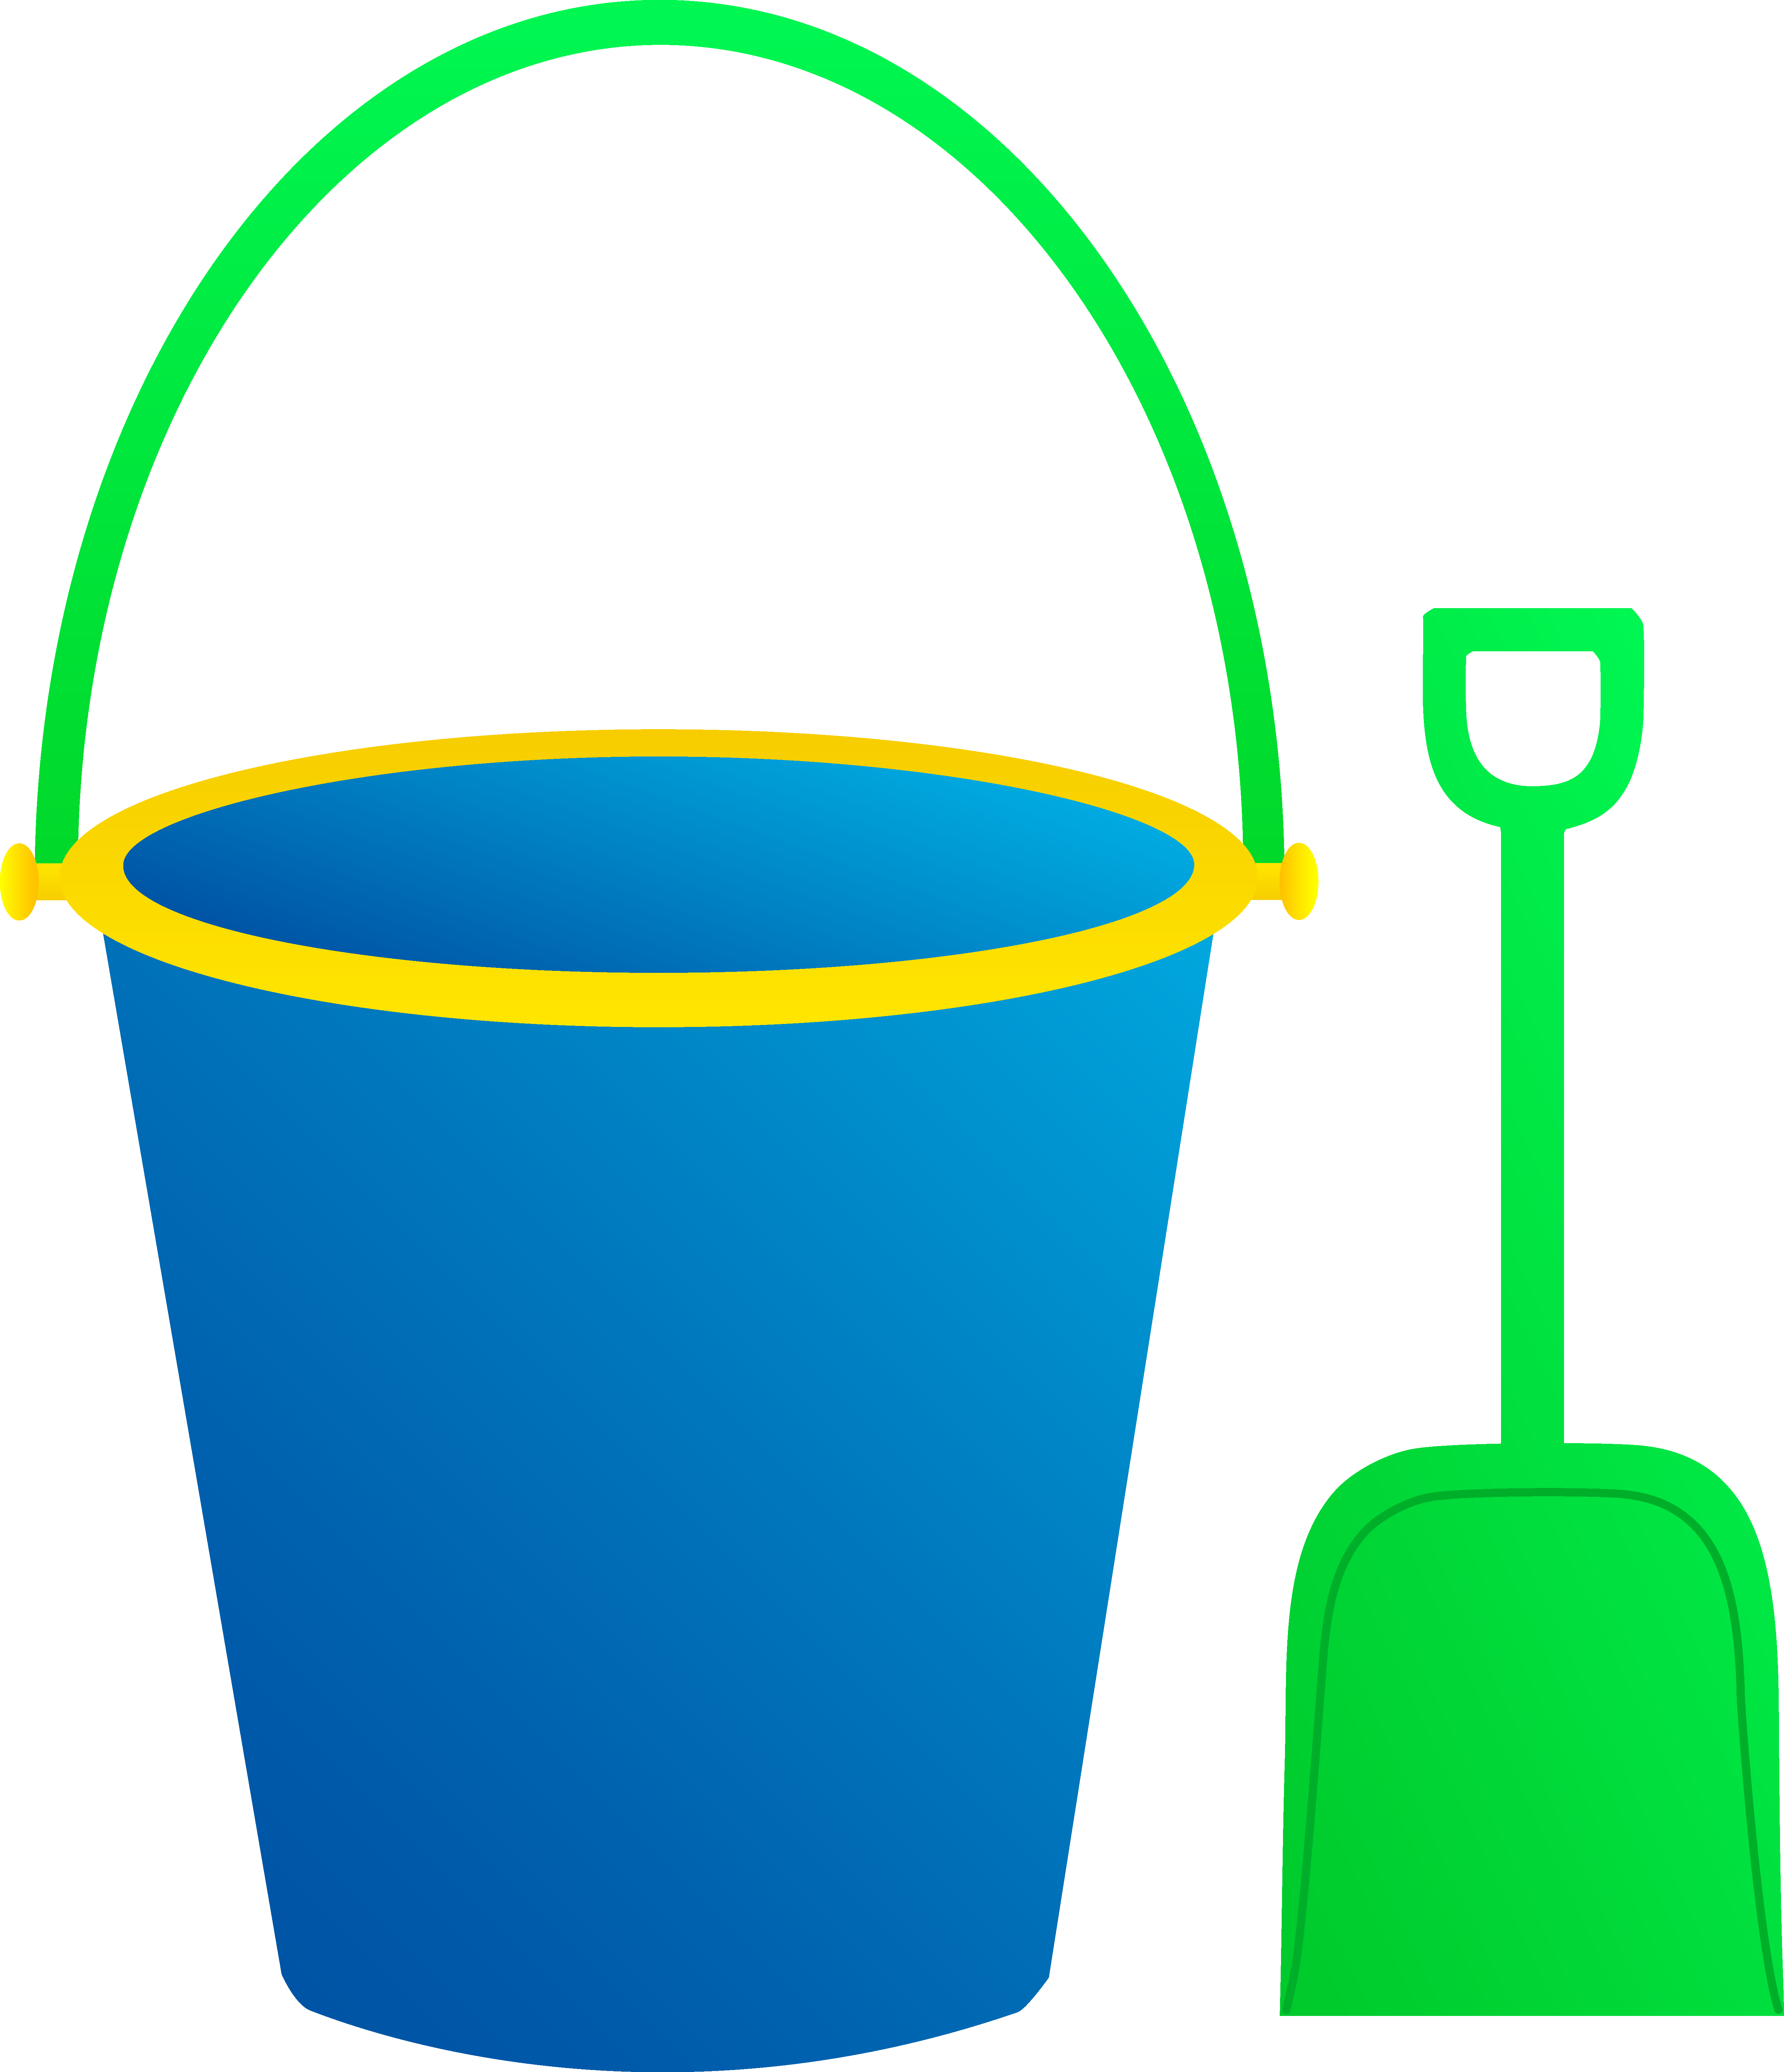 Blue Bucket And green Shovel Clipart free image.